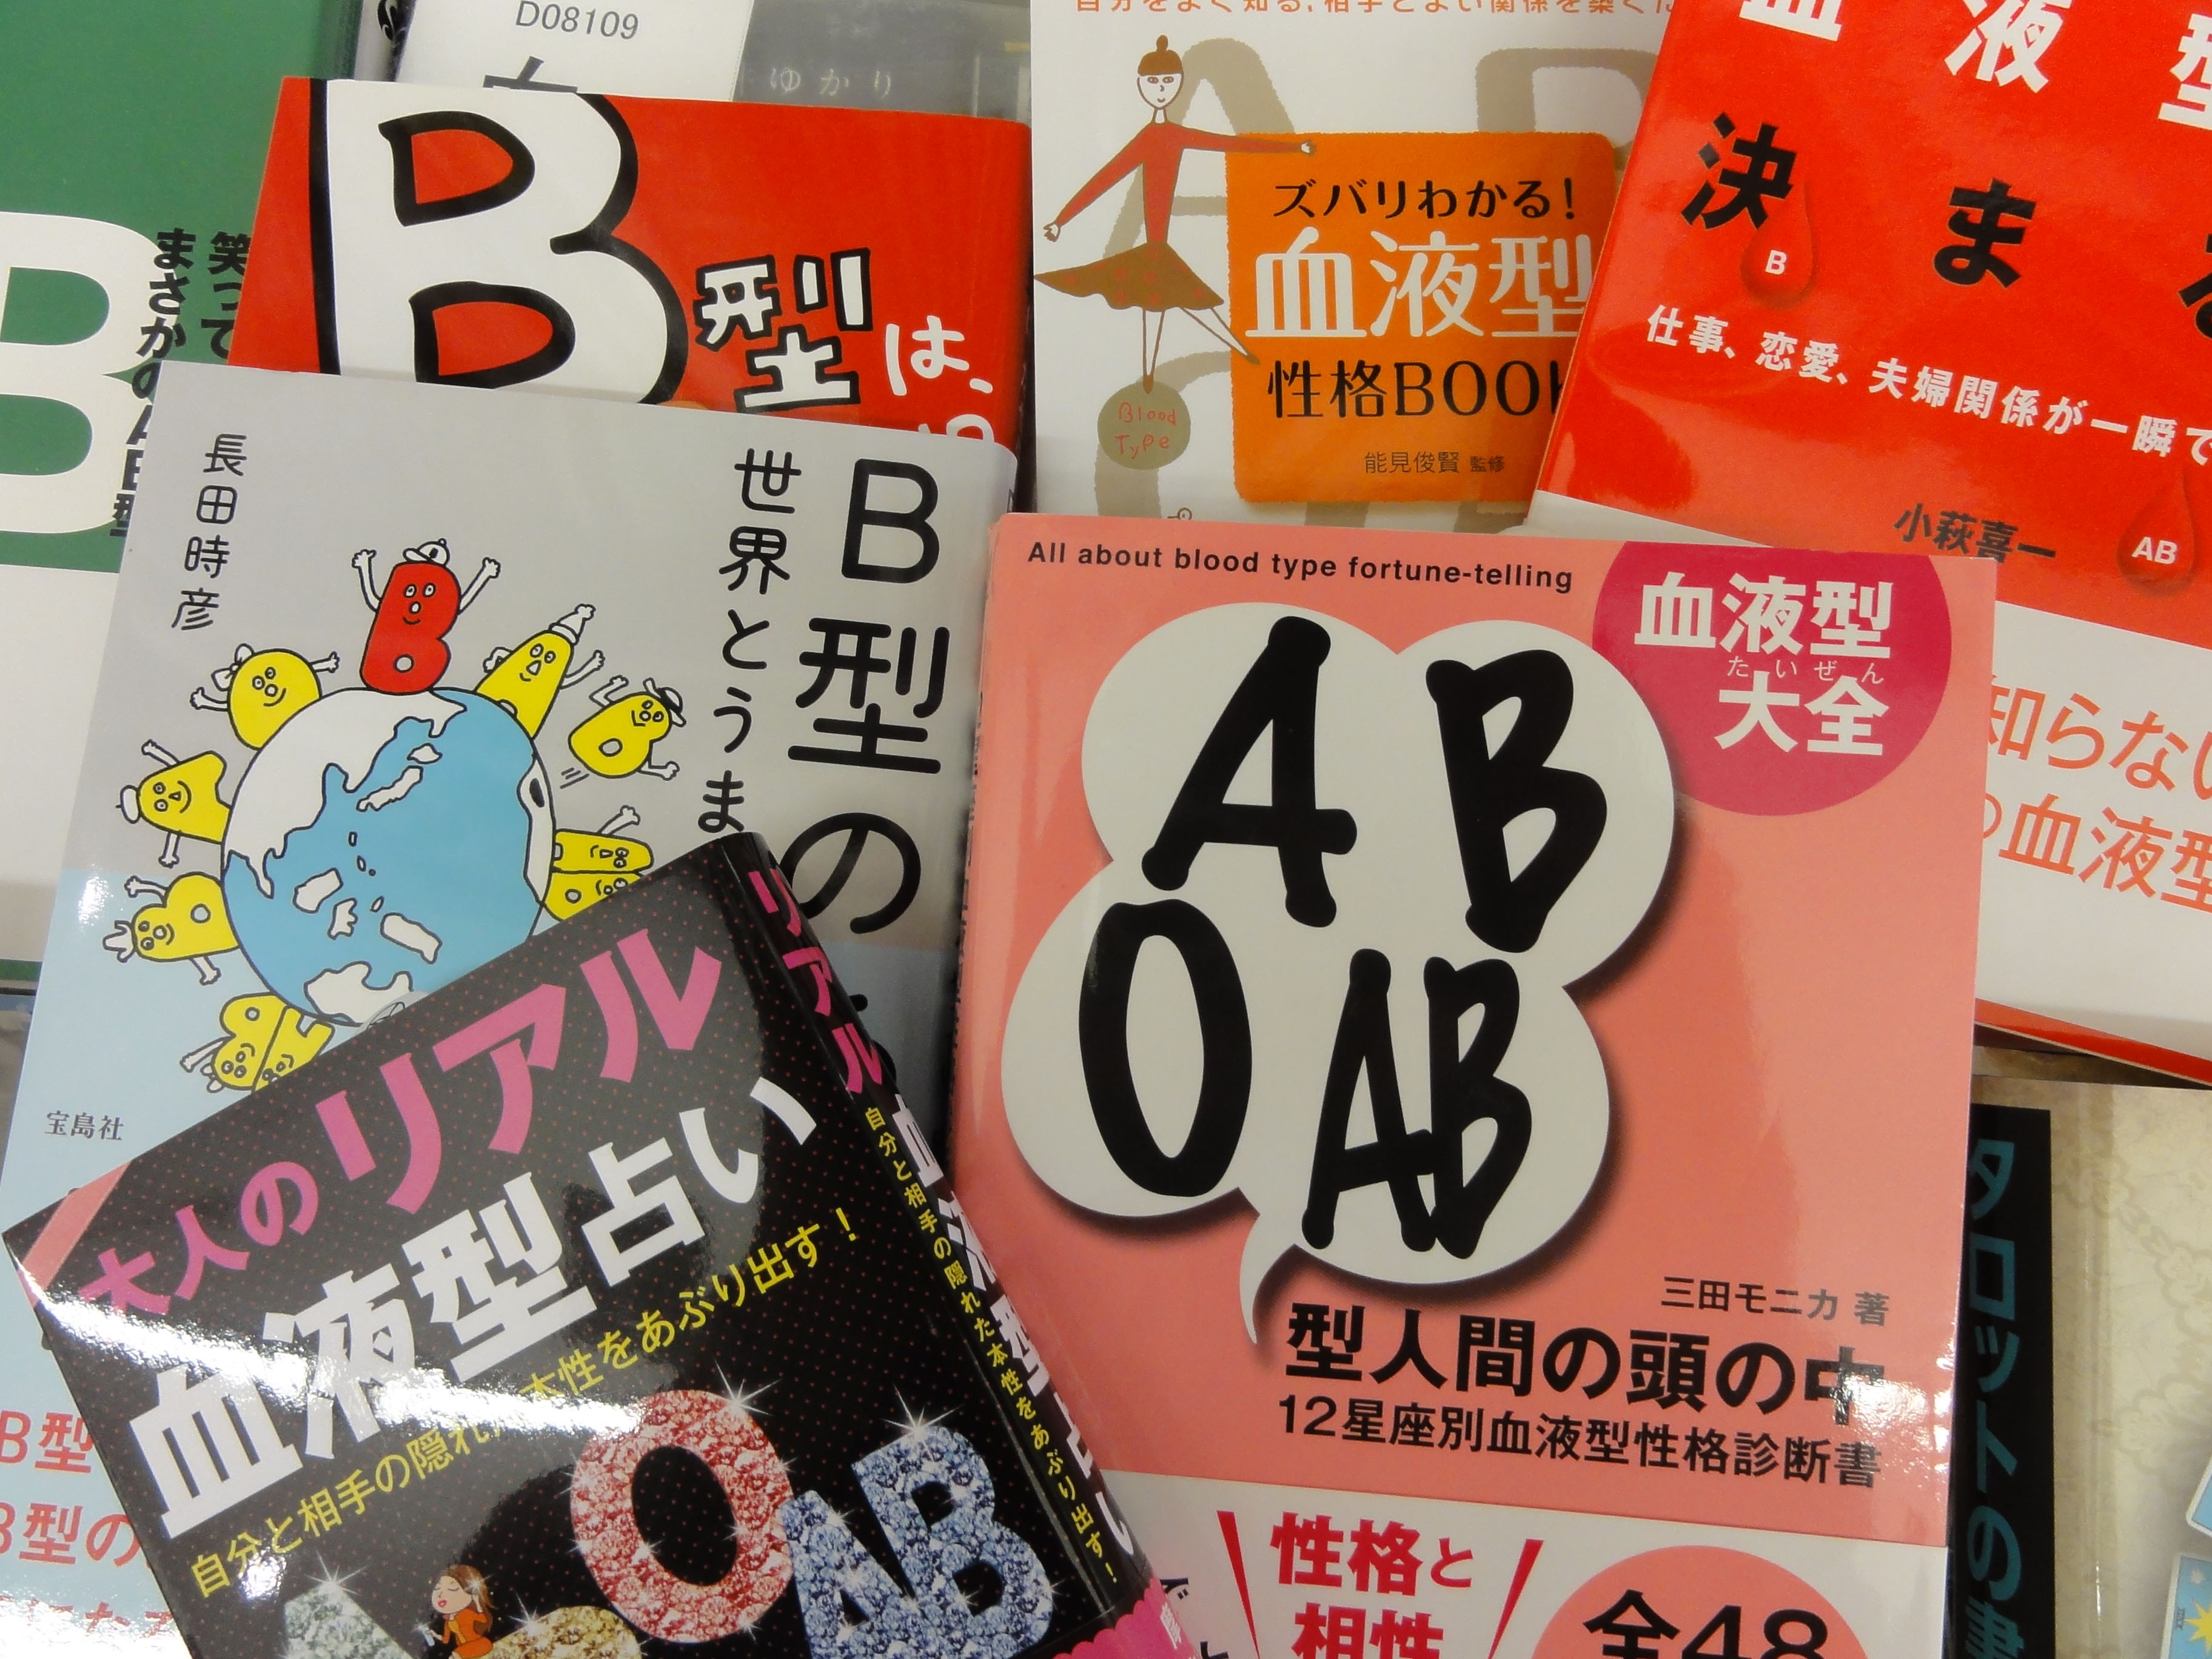 Blood will tell: Any Japanese bookstore worth its salt offers a full selection of books on ketsueki-gata uranai, or love-matching based on blood type. | AP